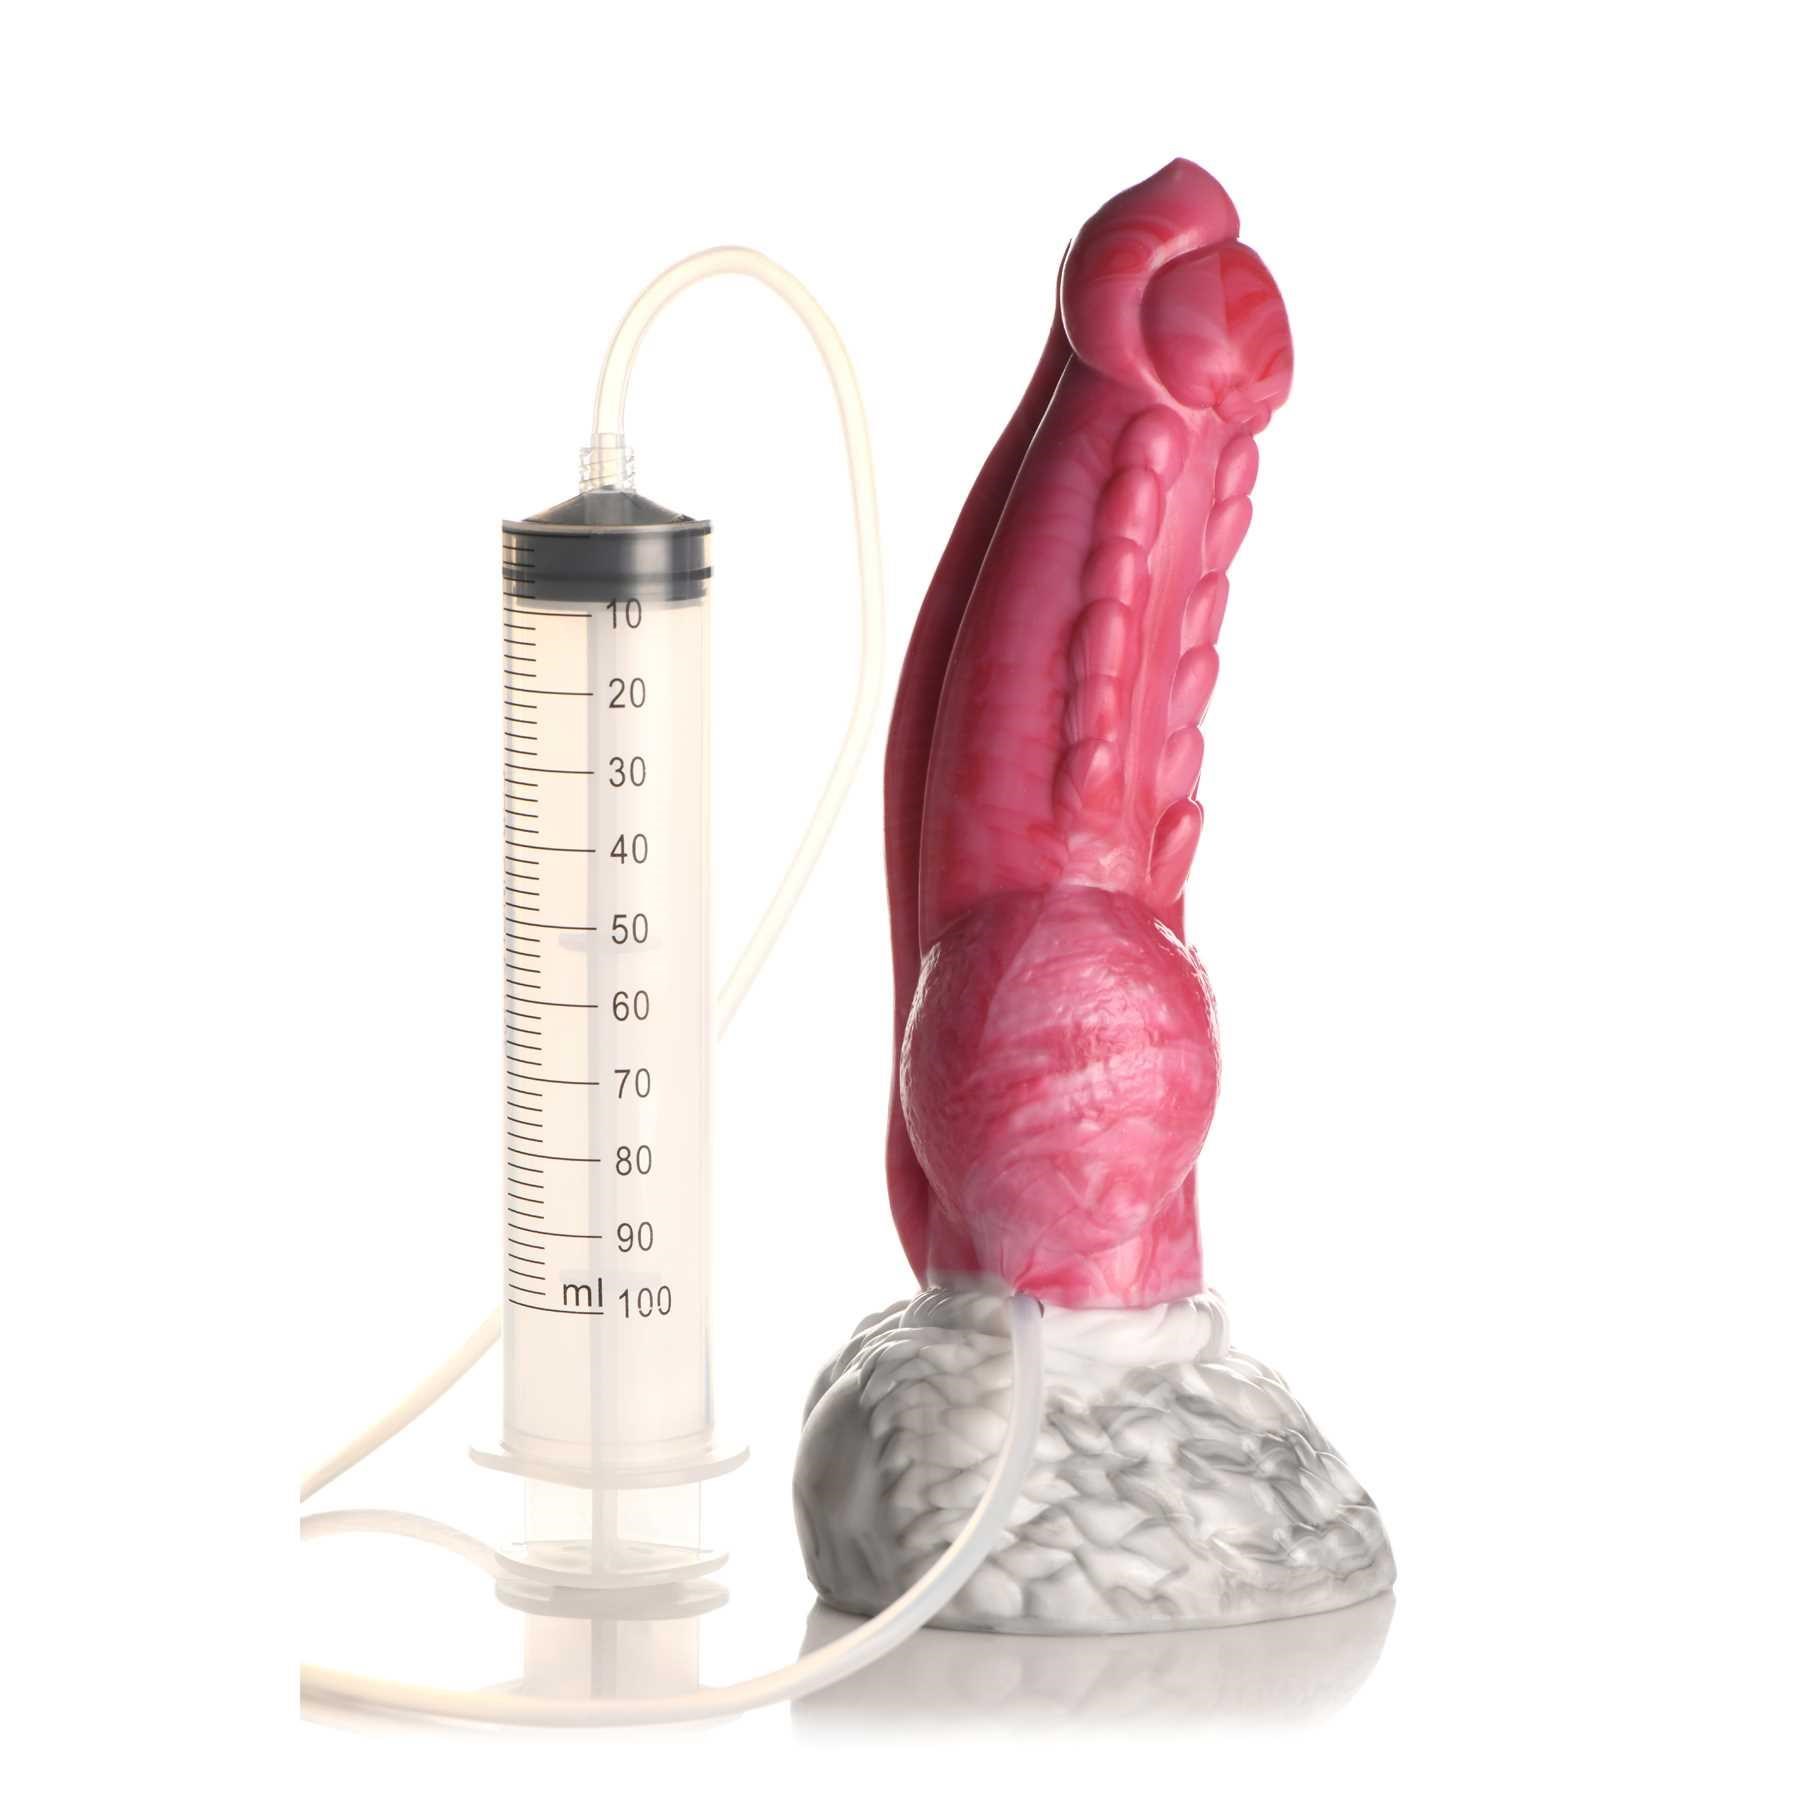 Creature Cock Resurrector Phoenix Squirting Silicone Dildo upright view with syringe